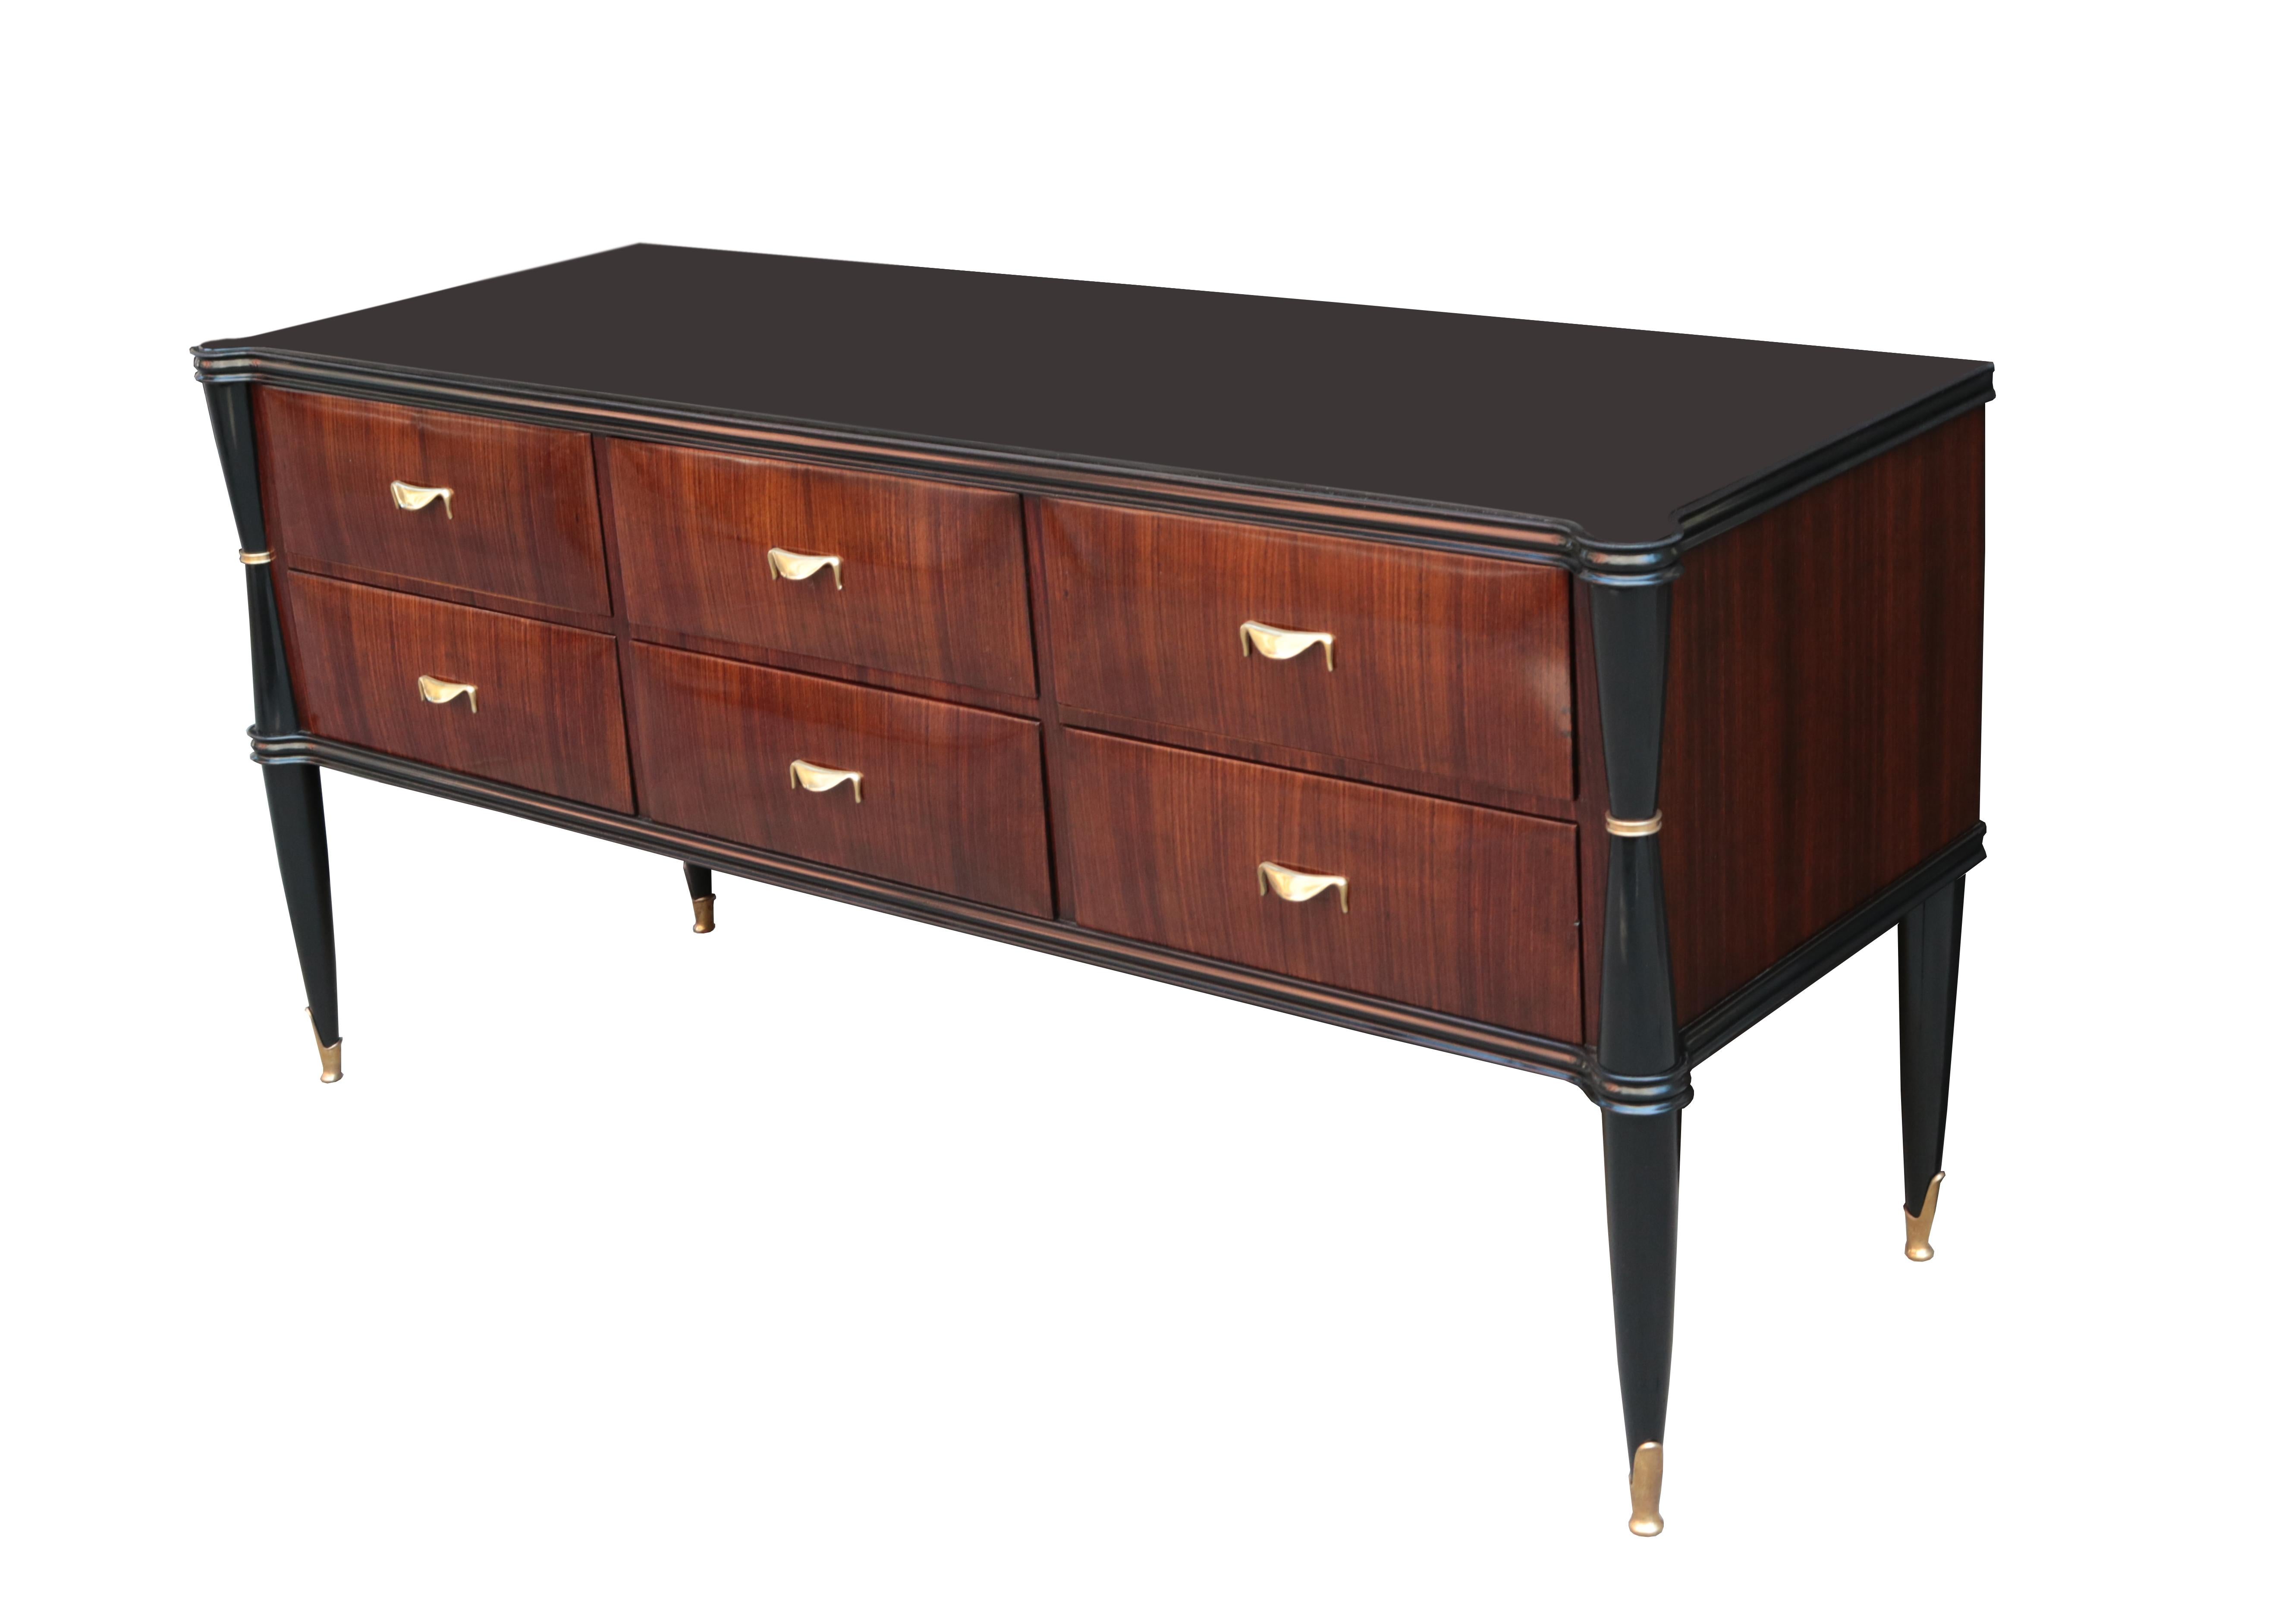 An Italian six drawer commode.
Mahogany with ebonized details,
patinated brass pulls and sabots,
with a black glass top.
 